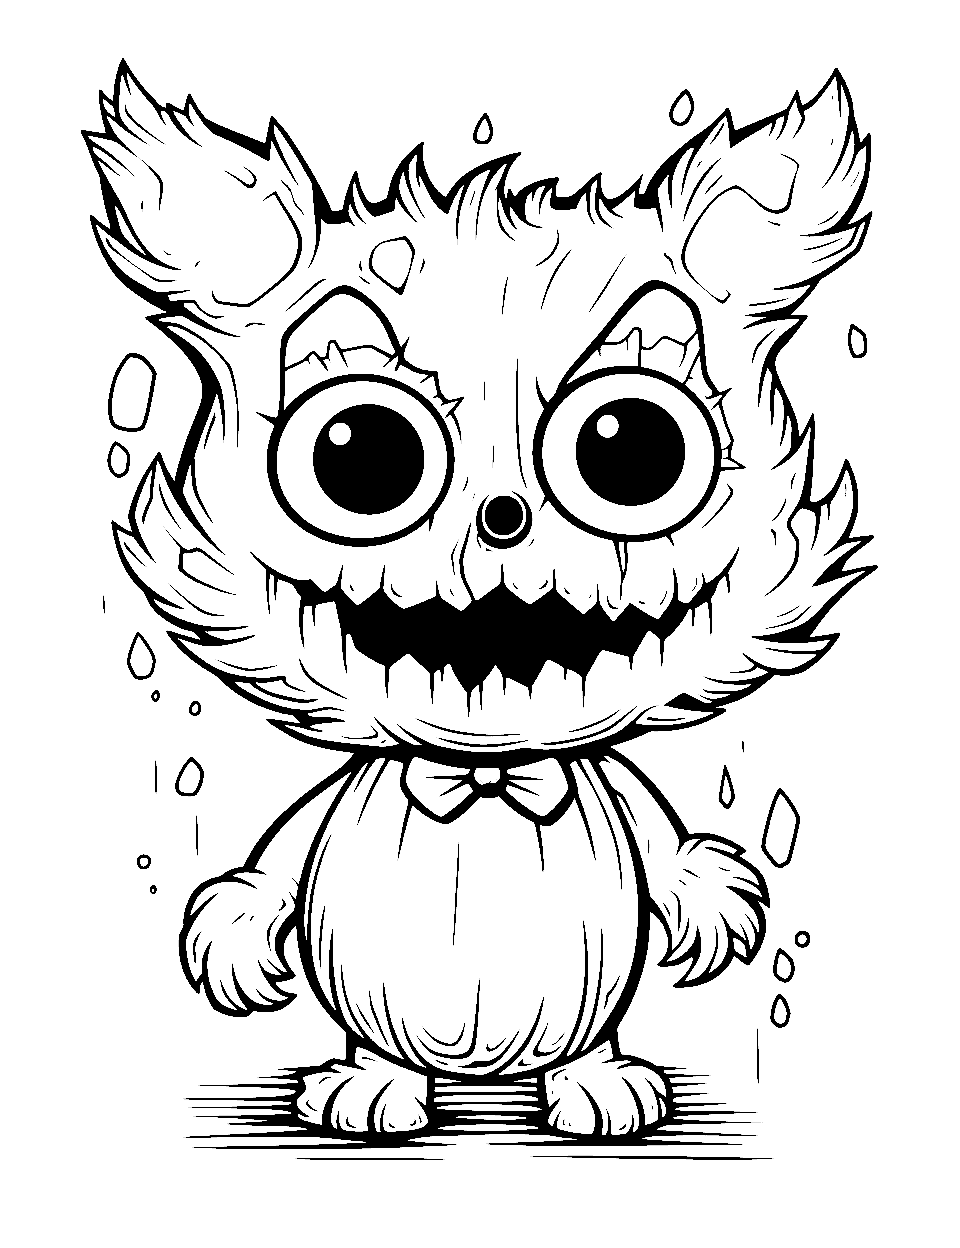 Nightmare’s Ominous Stare Coloring Page - Nightmare peering through the darkness with crazy eyes.